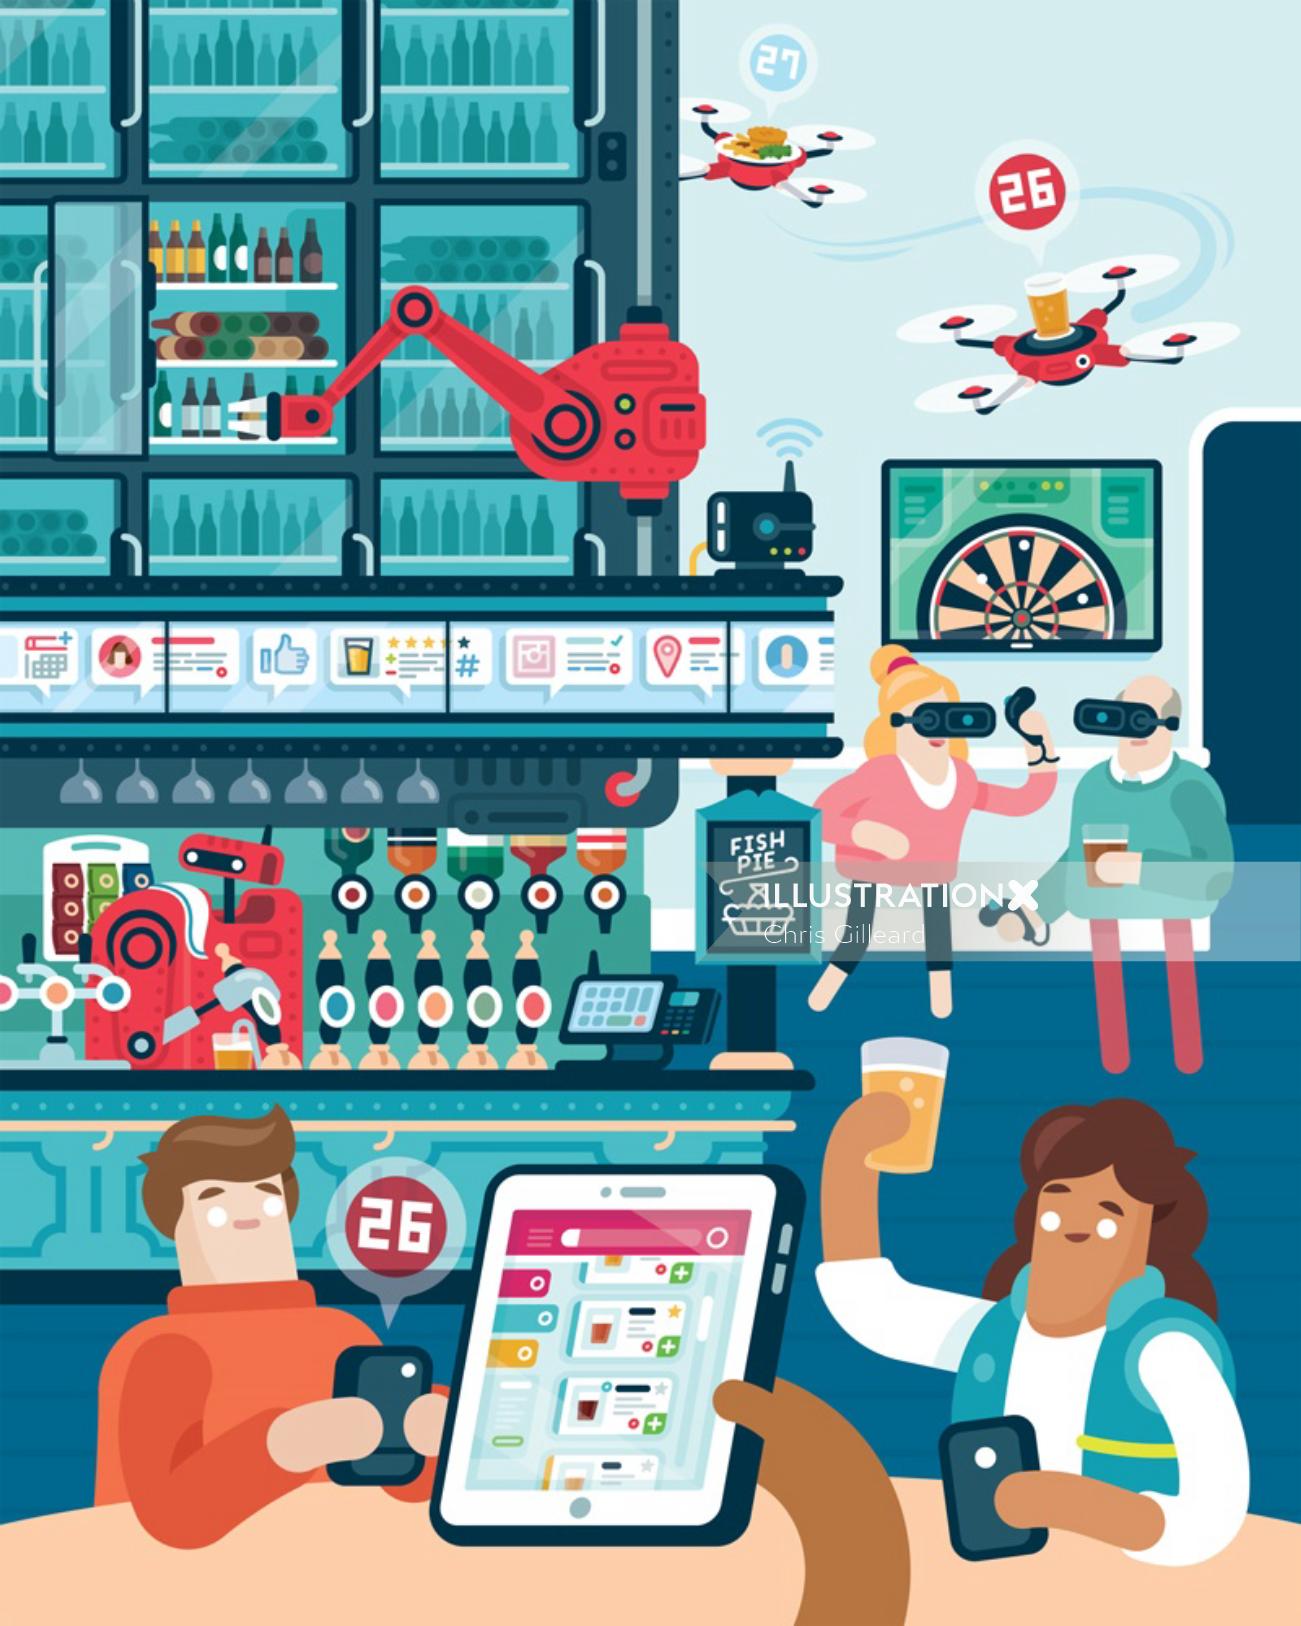 Editorial illustration for a magazine's food-drink section